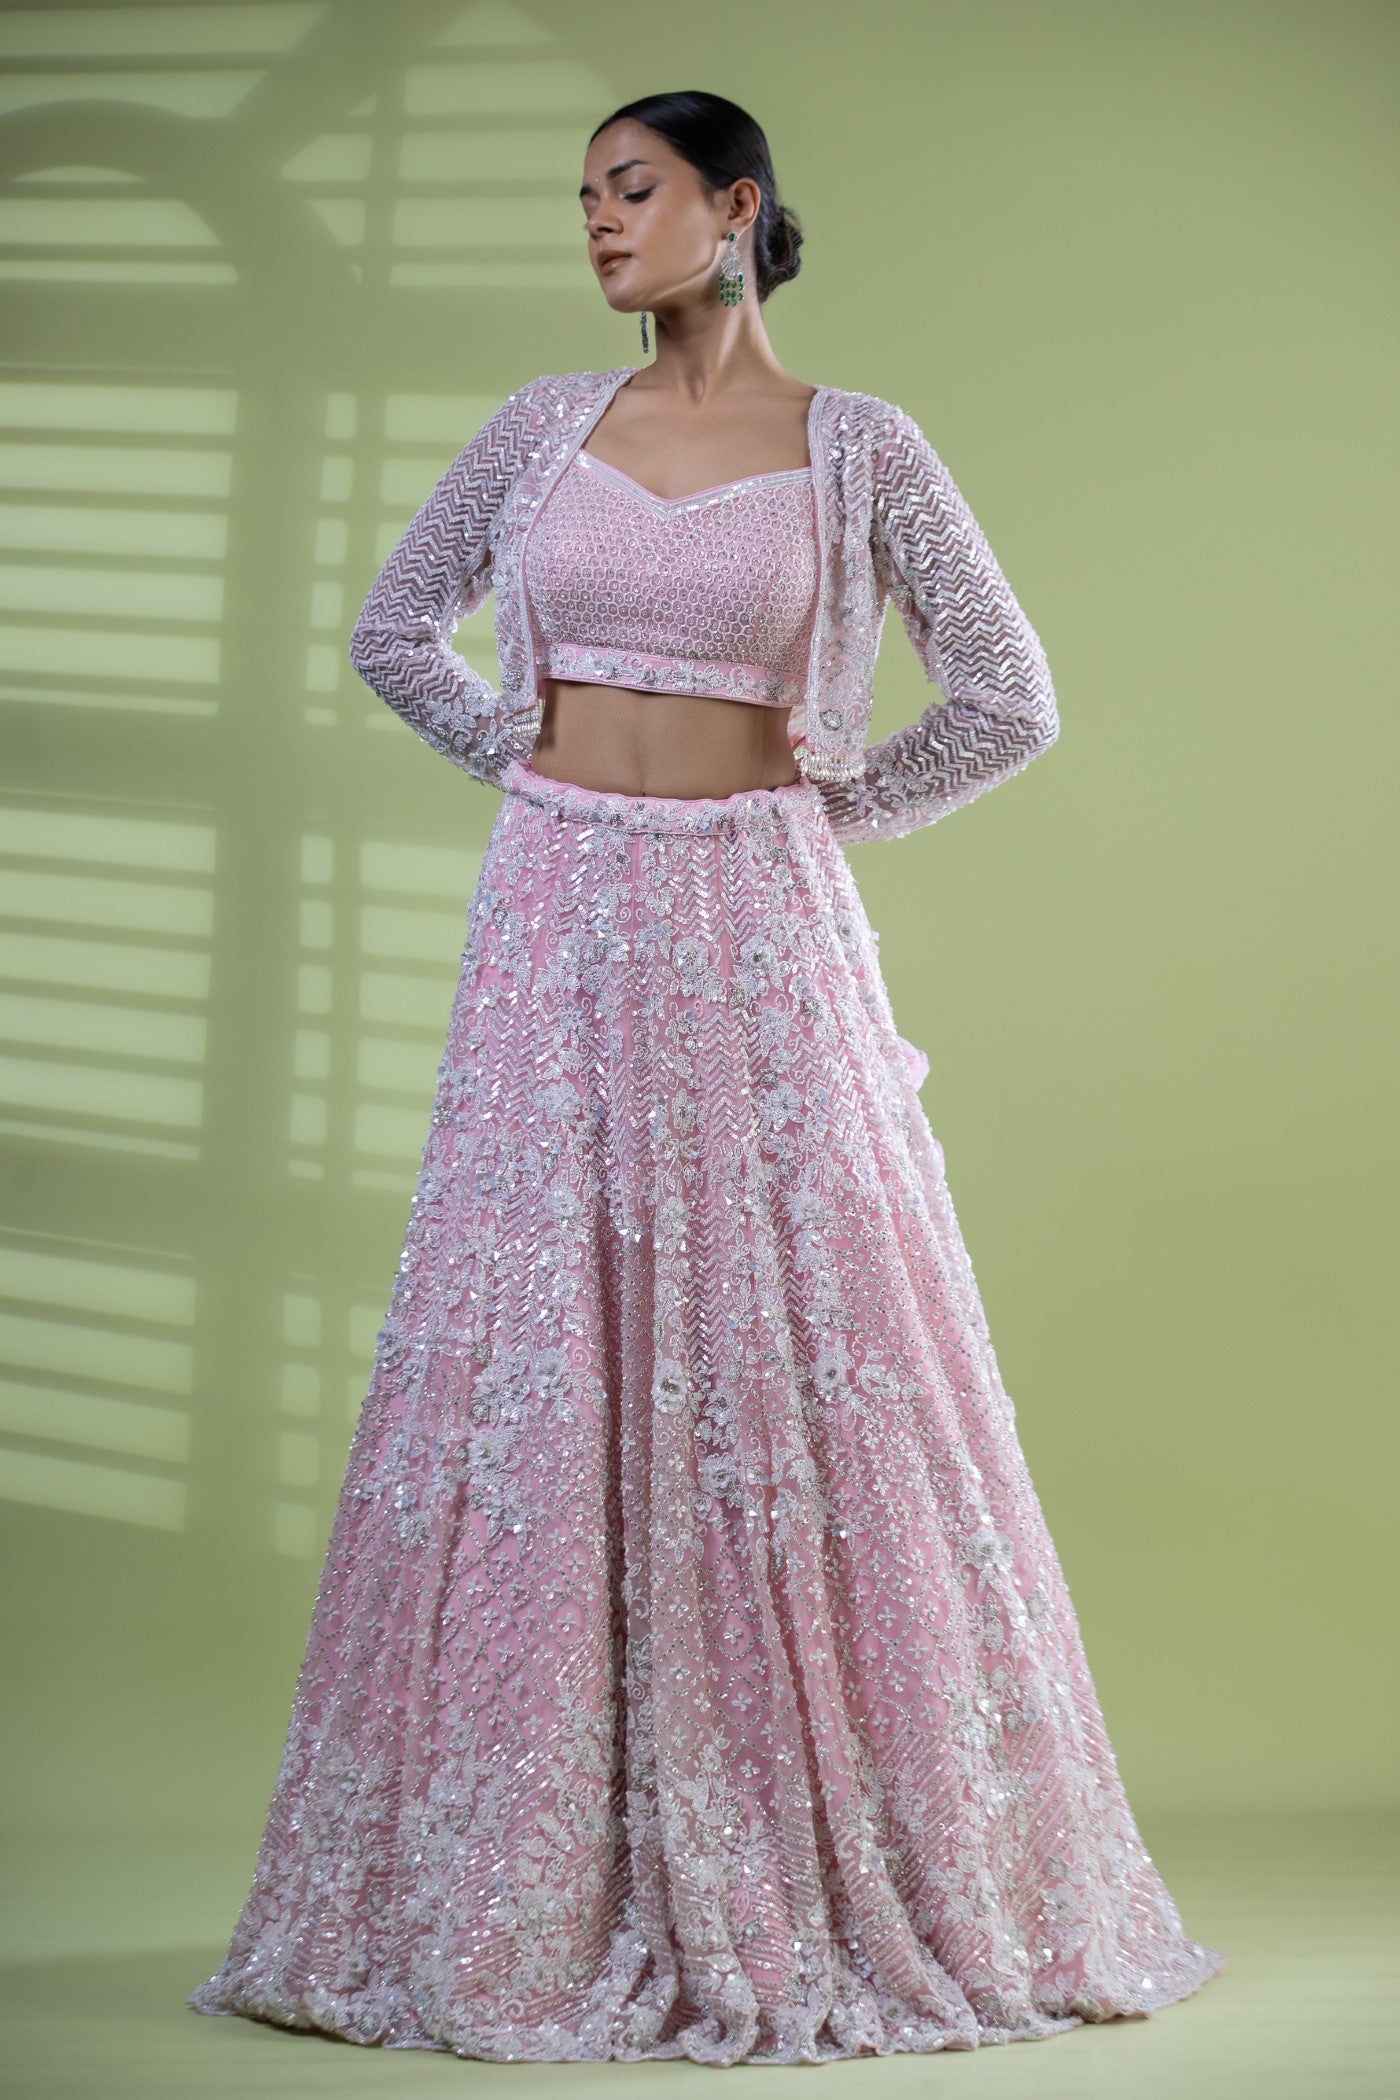 Lehengas with Short Jackets are All the Vogue in 2020. Get in on the Trend  with the Ultimate Lehengas with Short and Chic Jackets!